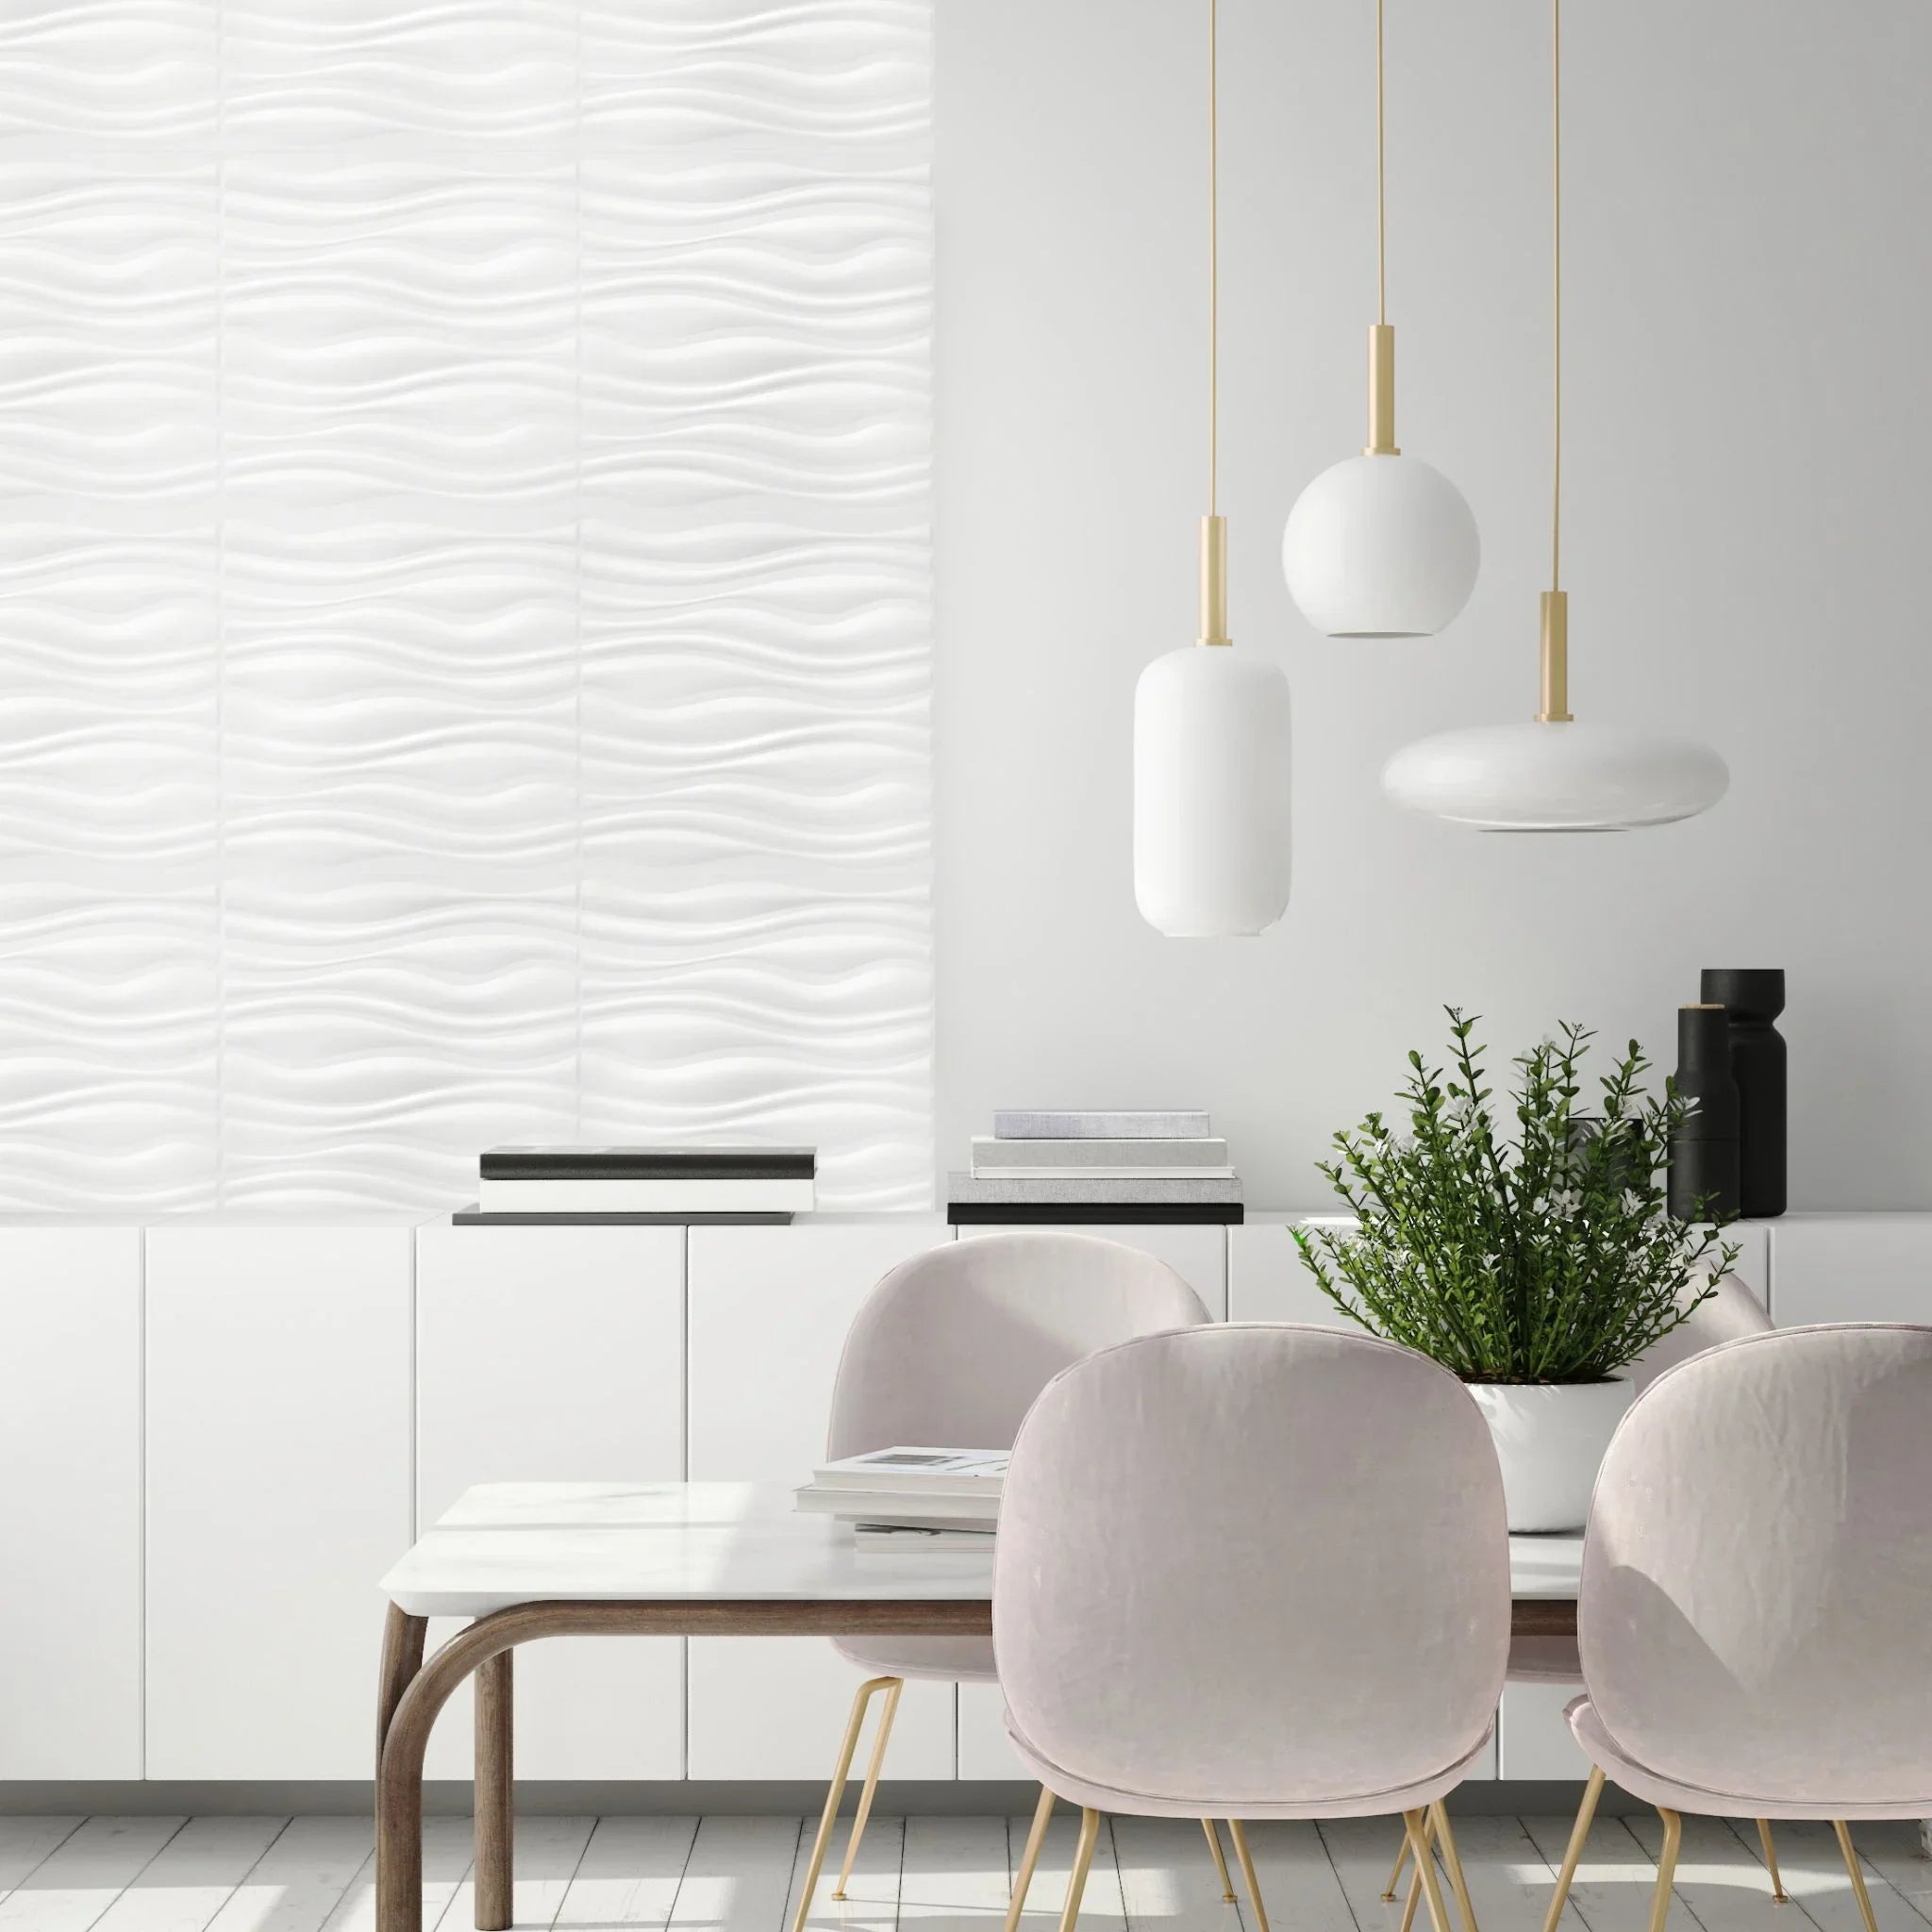 Dining room with white wavy PVC wall panels and modern decor